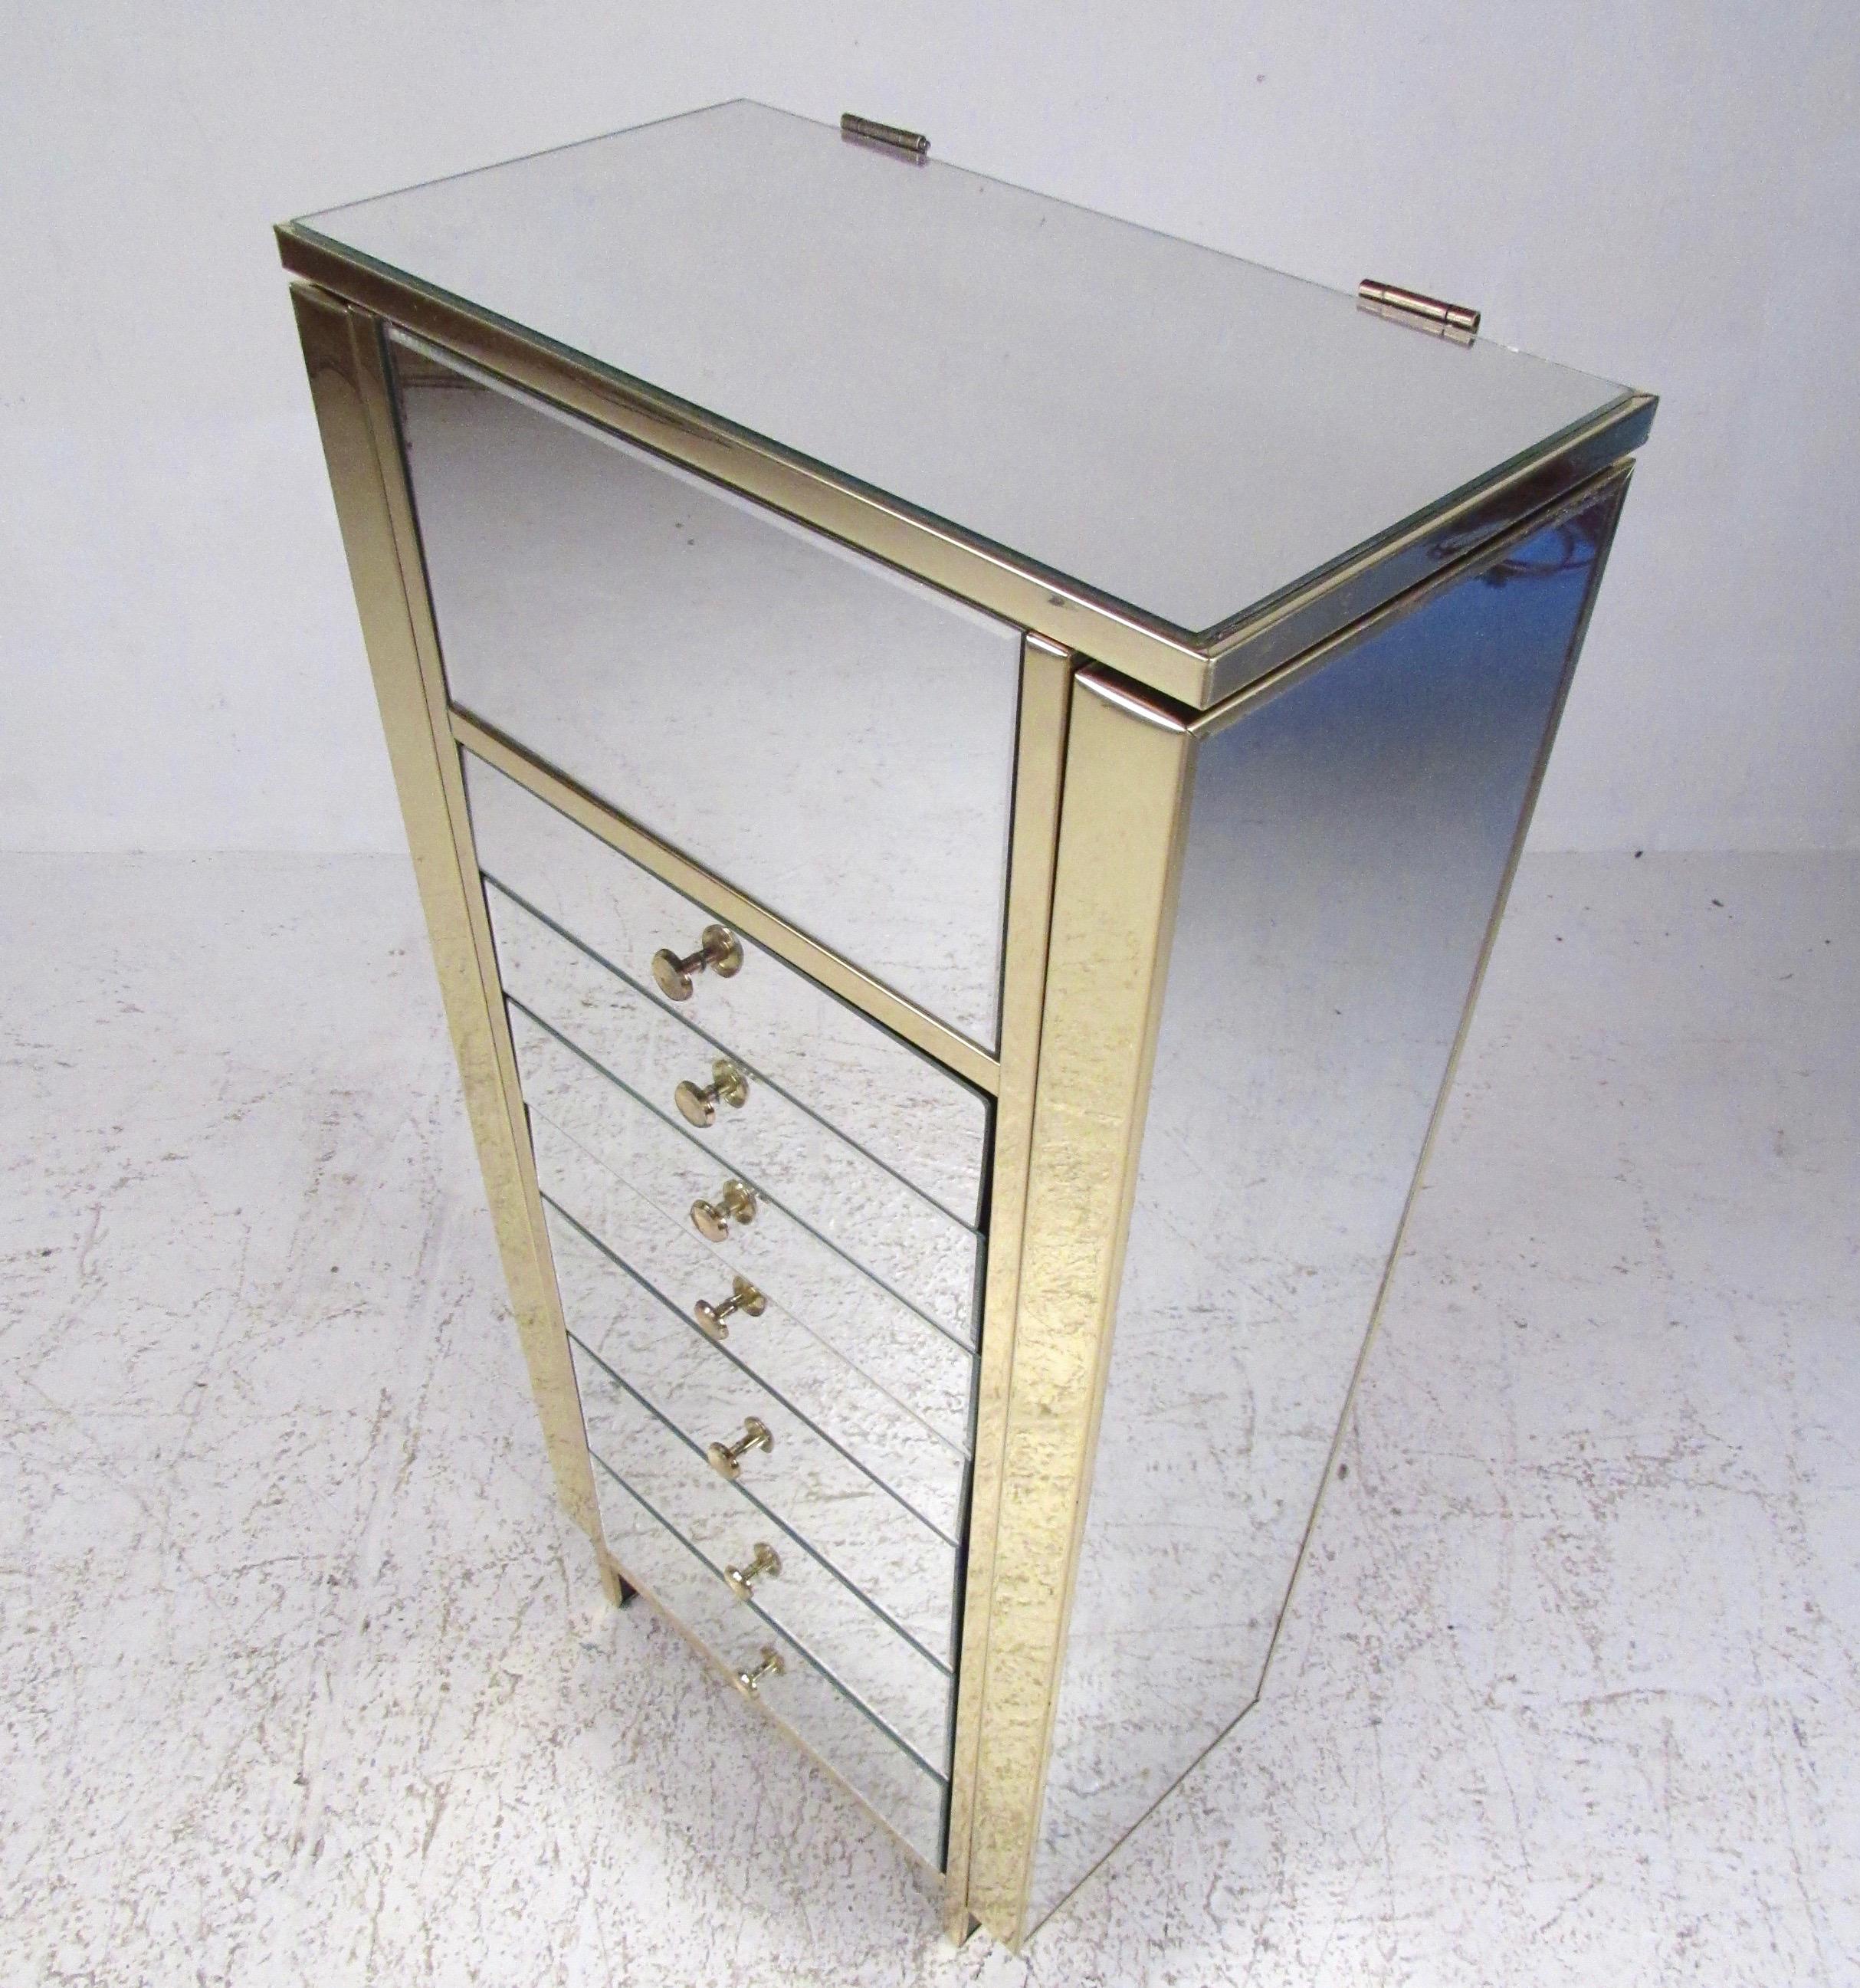 This stylish midcentury style jewelry box features a variety of storage compartments in dresser form, perfect for bedroom or dressing room decor. Mirror and brass finish add elegance to this Hollywood Regency style jewelry chest. Please confirm item